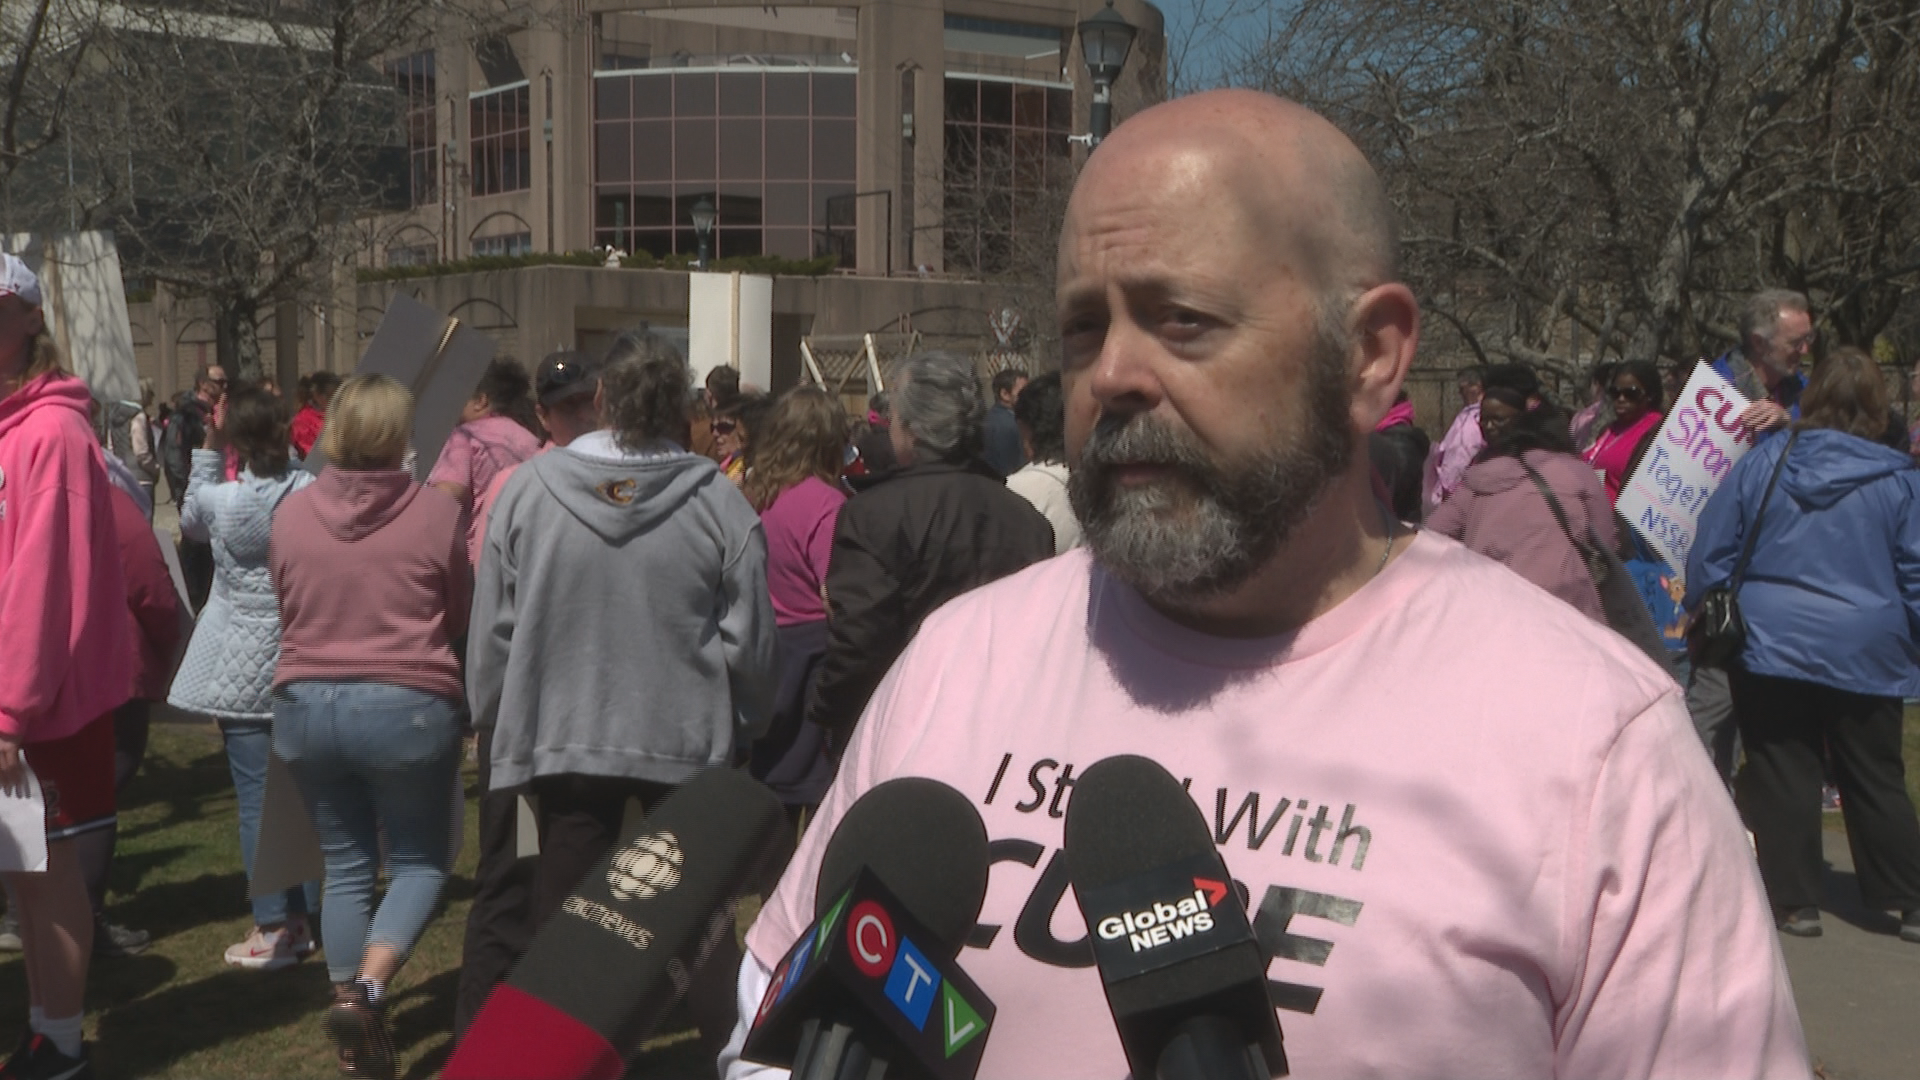 Chris Melanson, president of CUPE’s branch that represents employees of the Halifax Regional Centre for Education, said he was motivated by Saturday’s turnout.